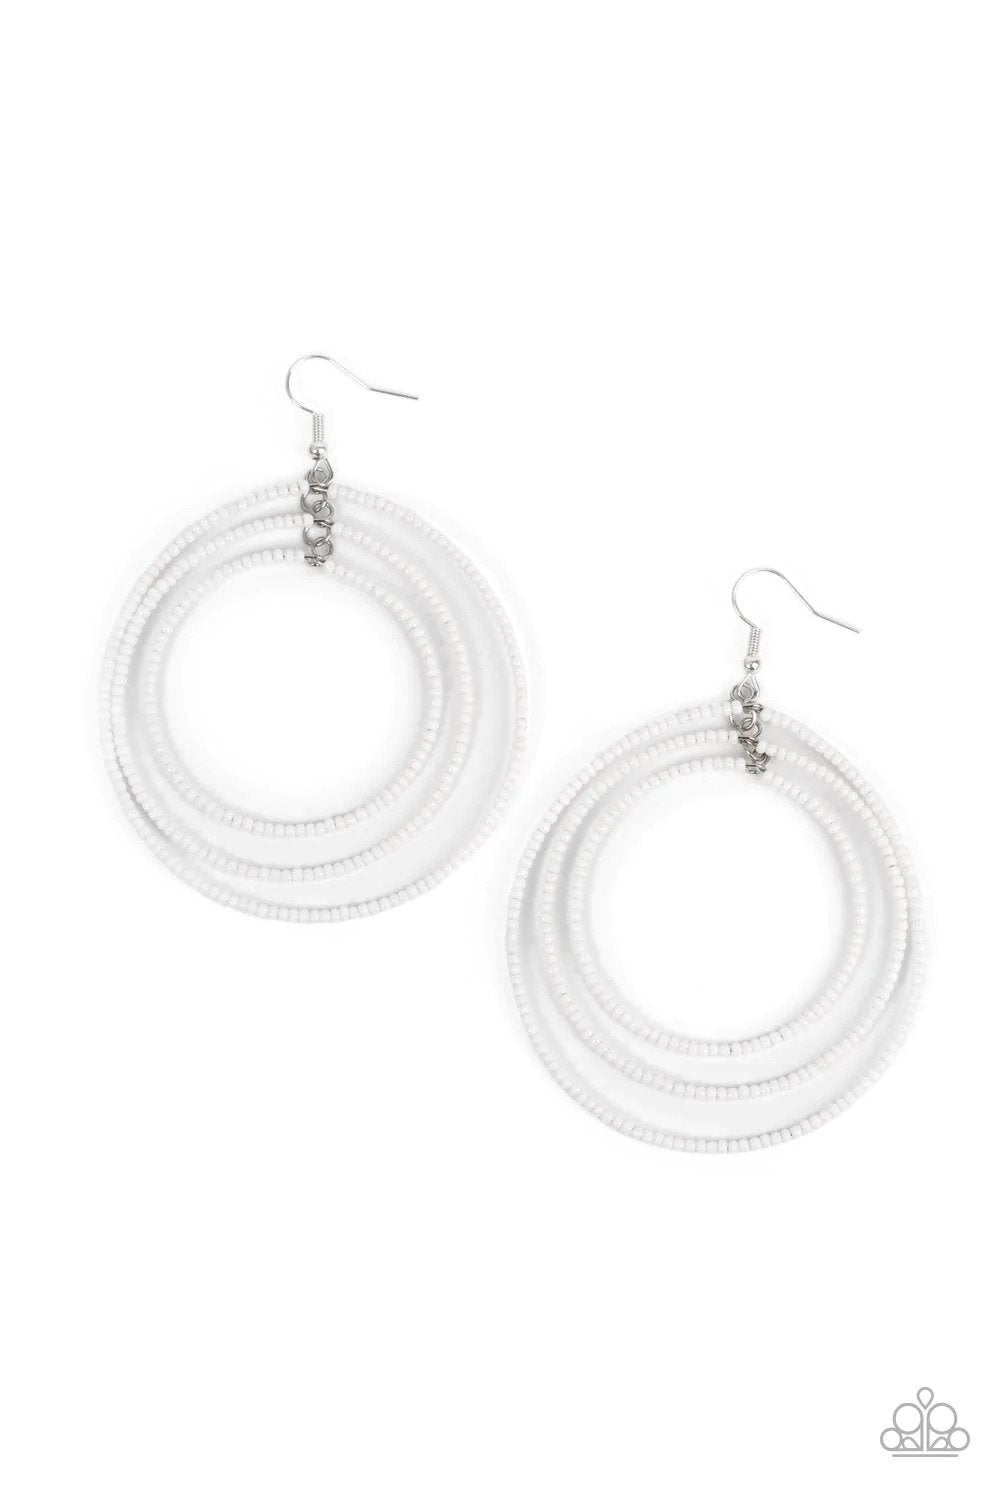 Colorfully Circulating White Earrings - Paparazzi Accessories- lightbox - CarasShop.com - $5 Jewelry by Cara Jewels